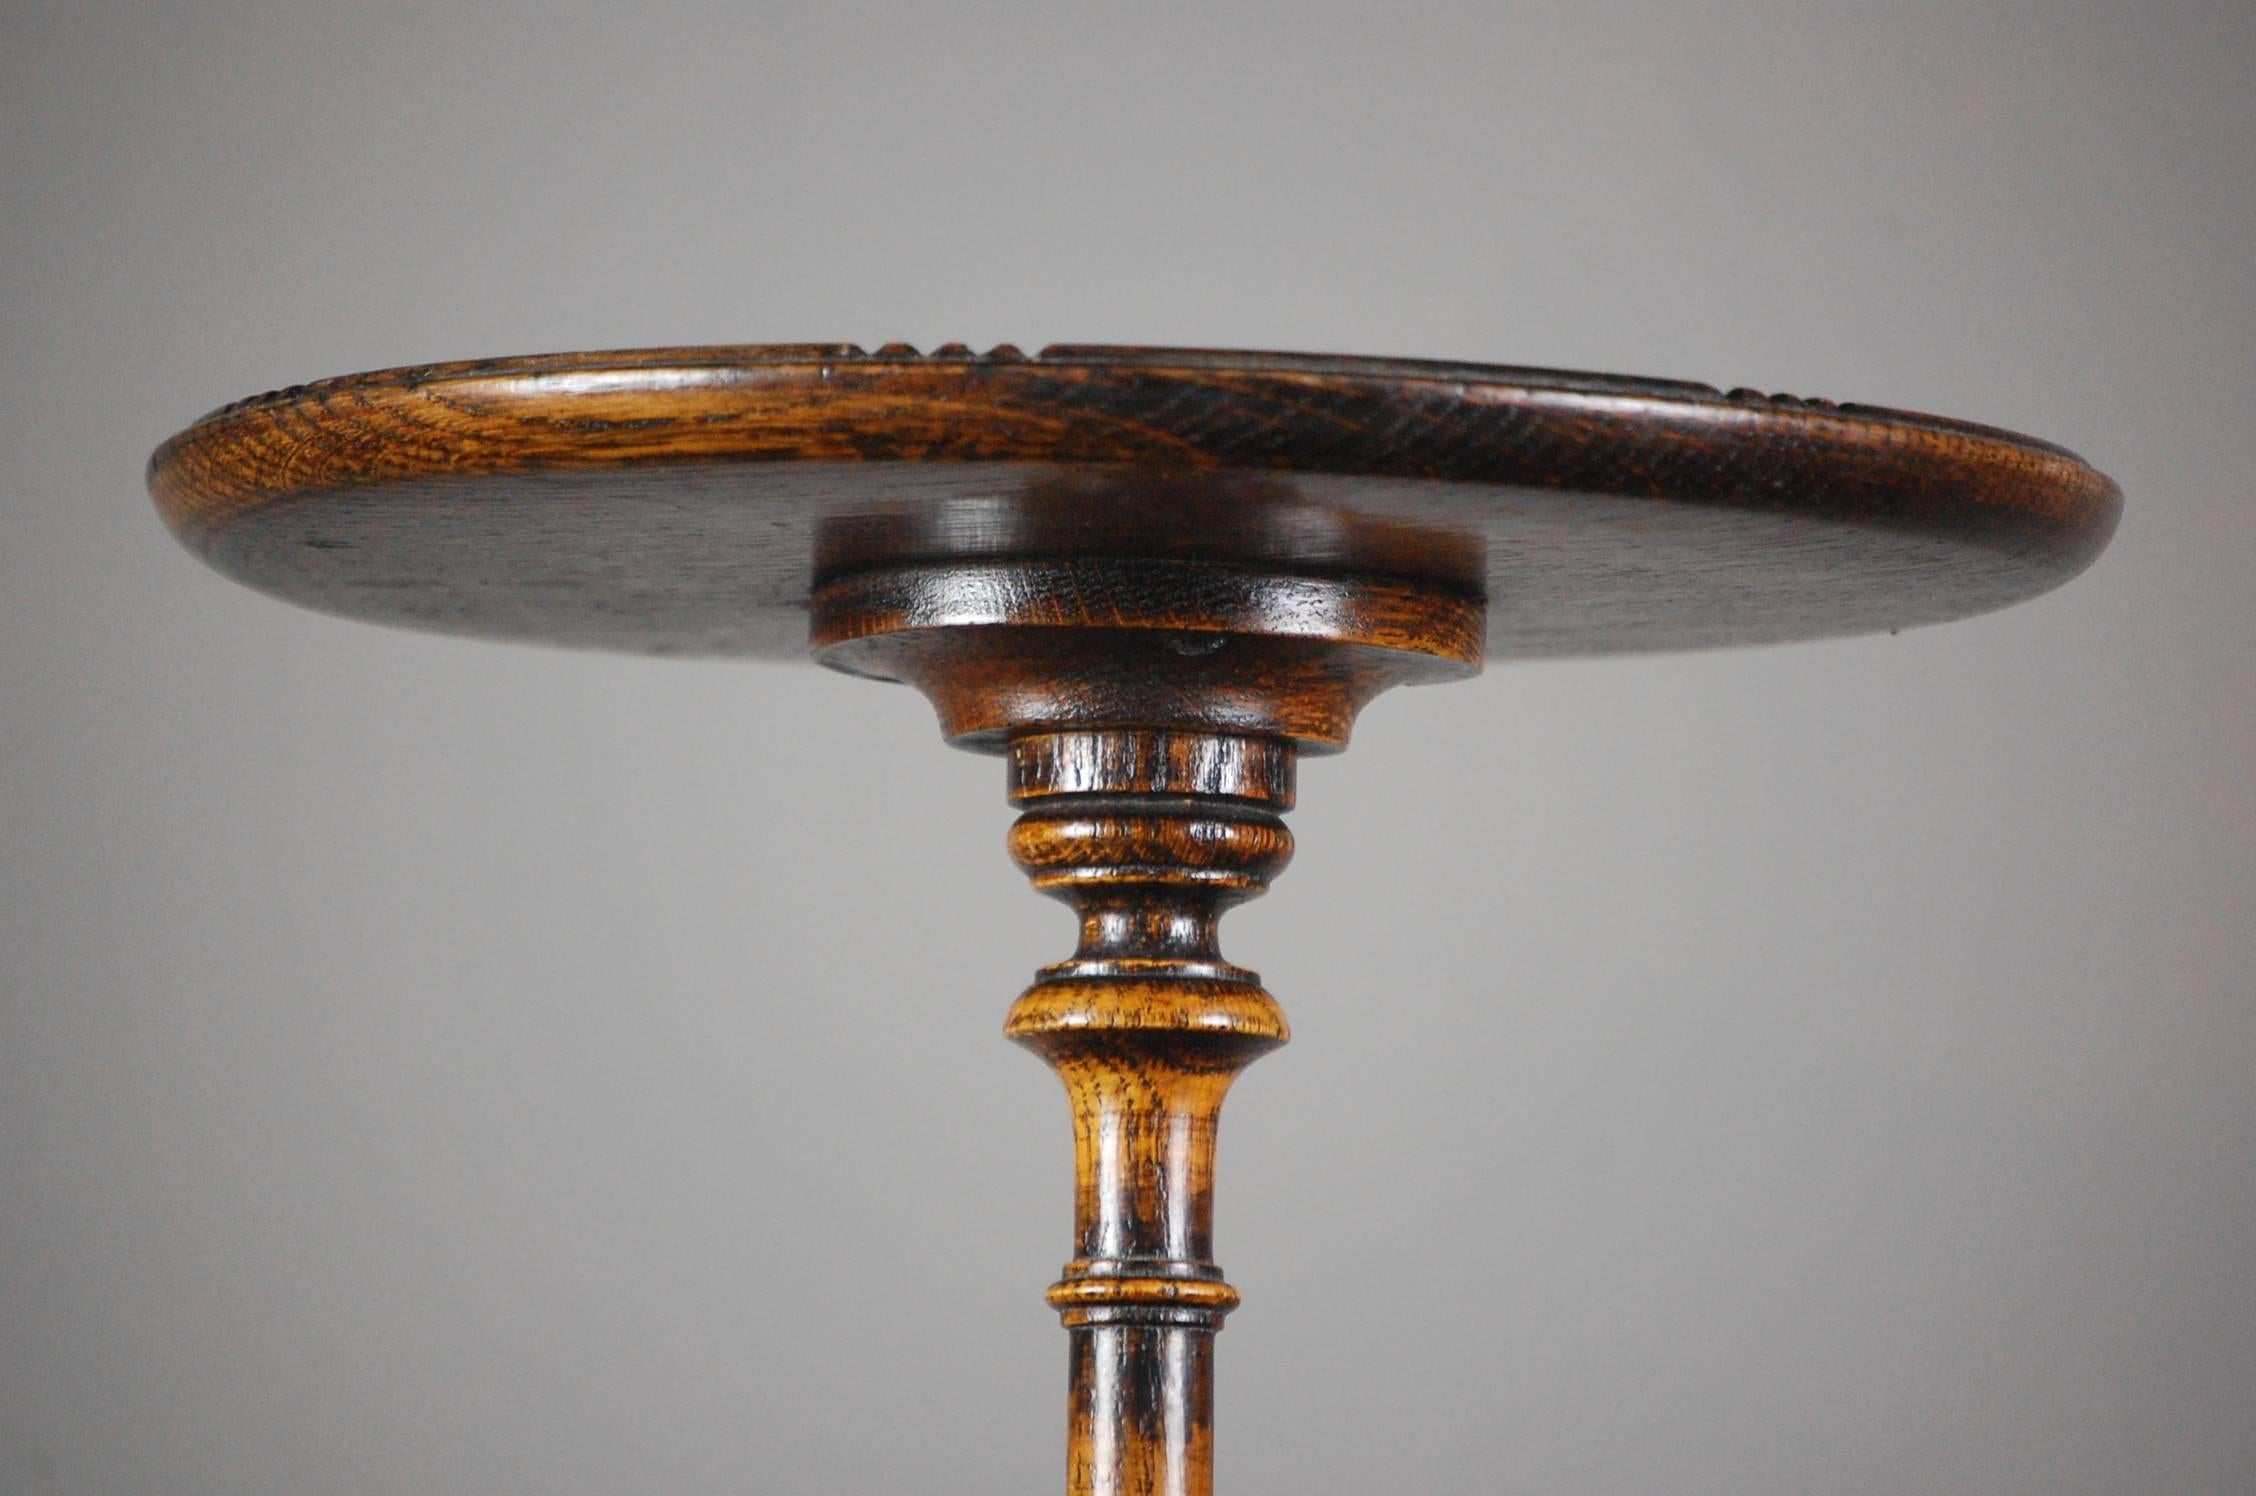 Delightful Edwardian English wine table, nice color and patination.